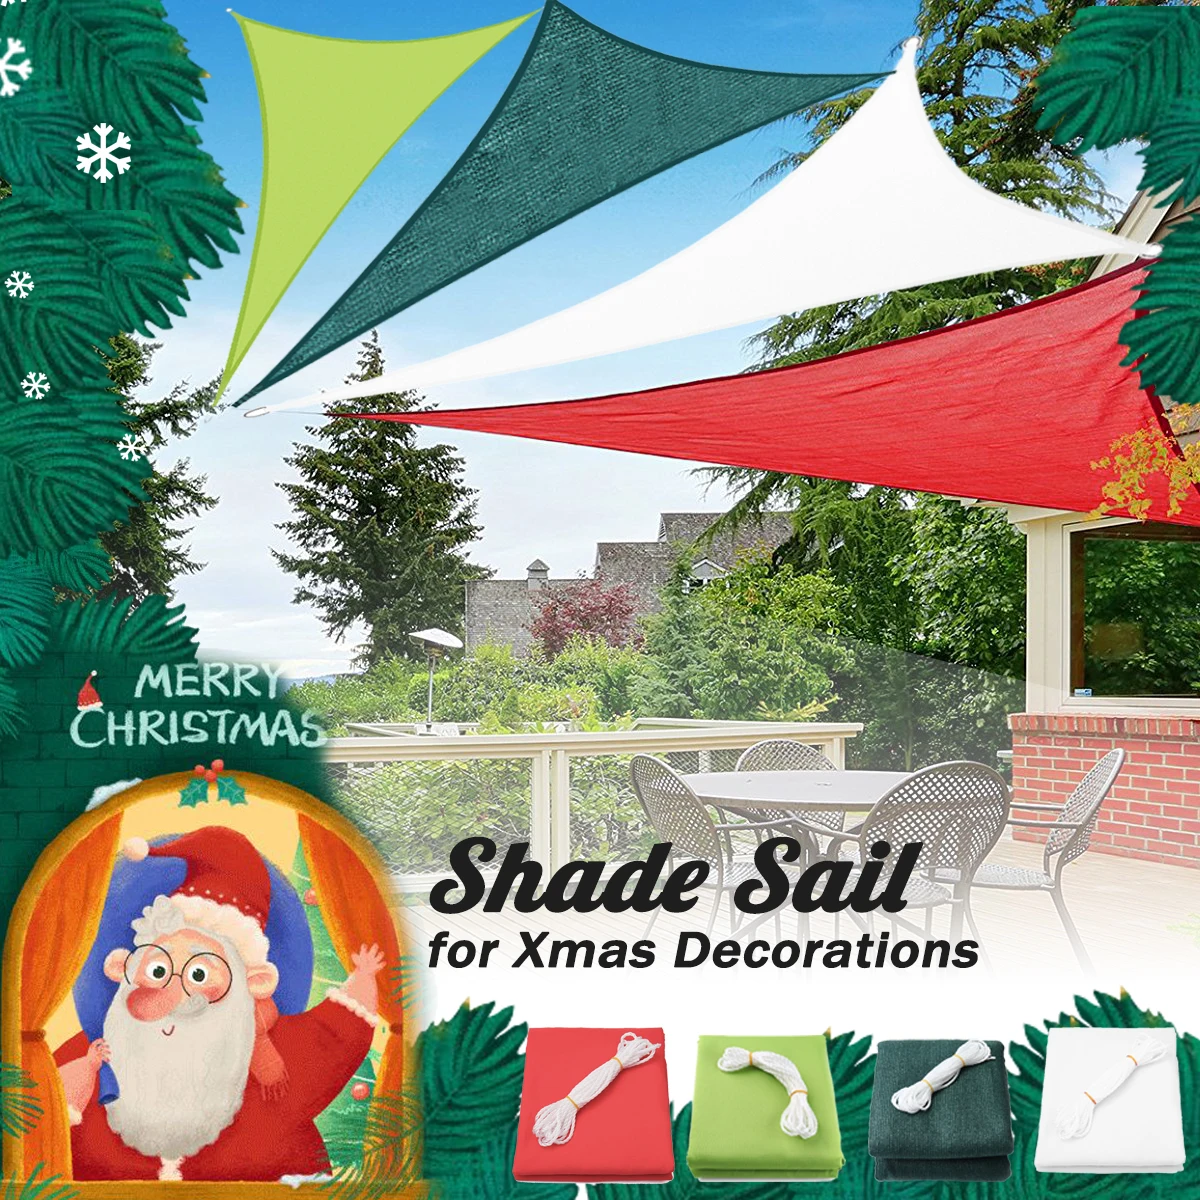 

3x3x3m 300D PET 185GSM HDPE Shade Sail Waterproof Triangle Sun Awning Tarp Canopy Ornament Decoration Red Green White